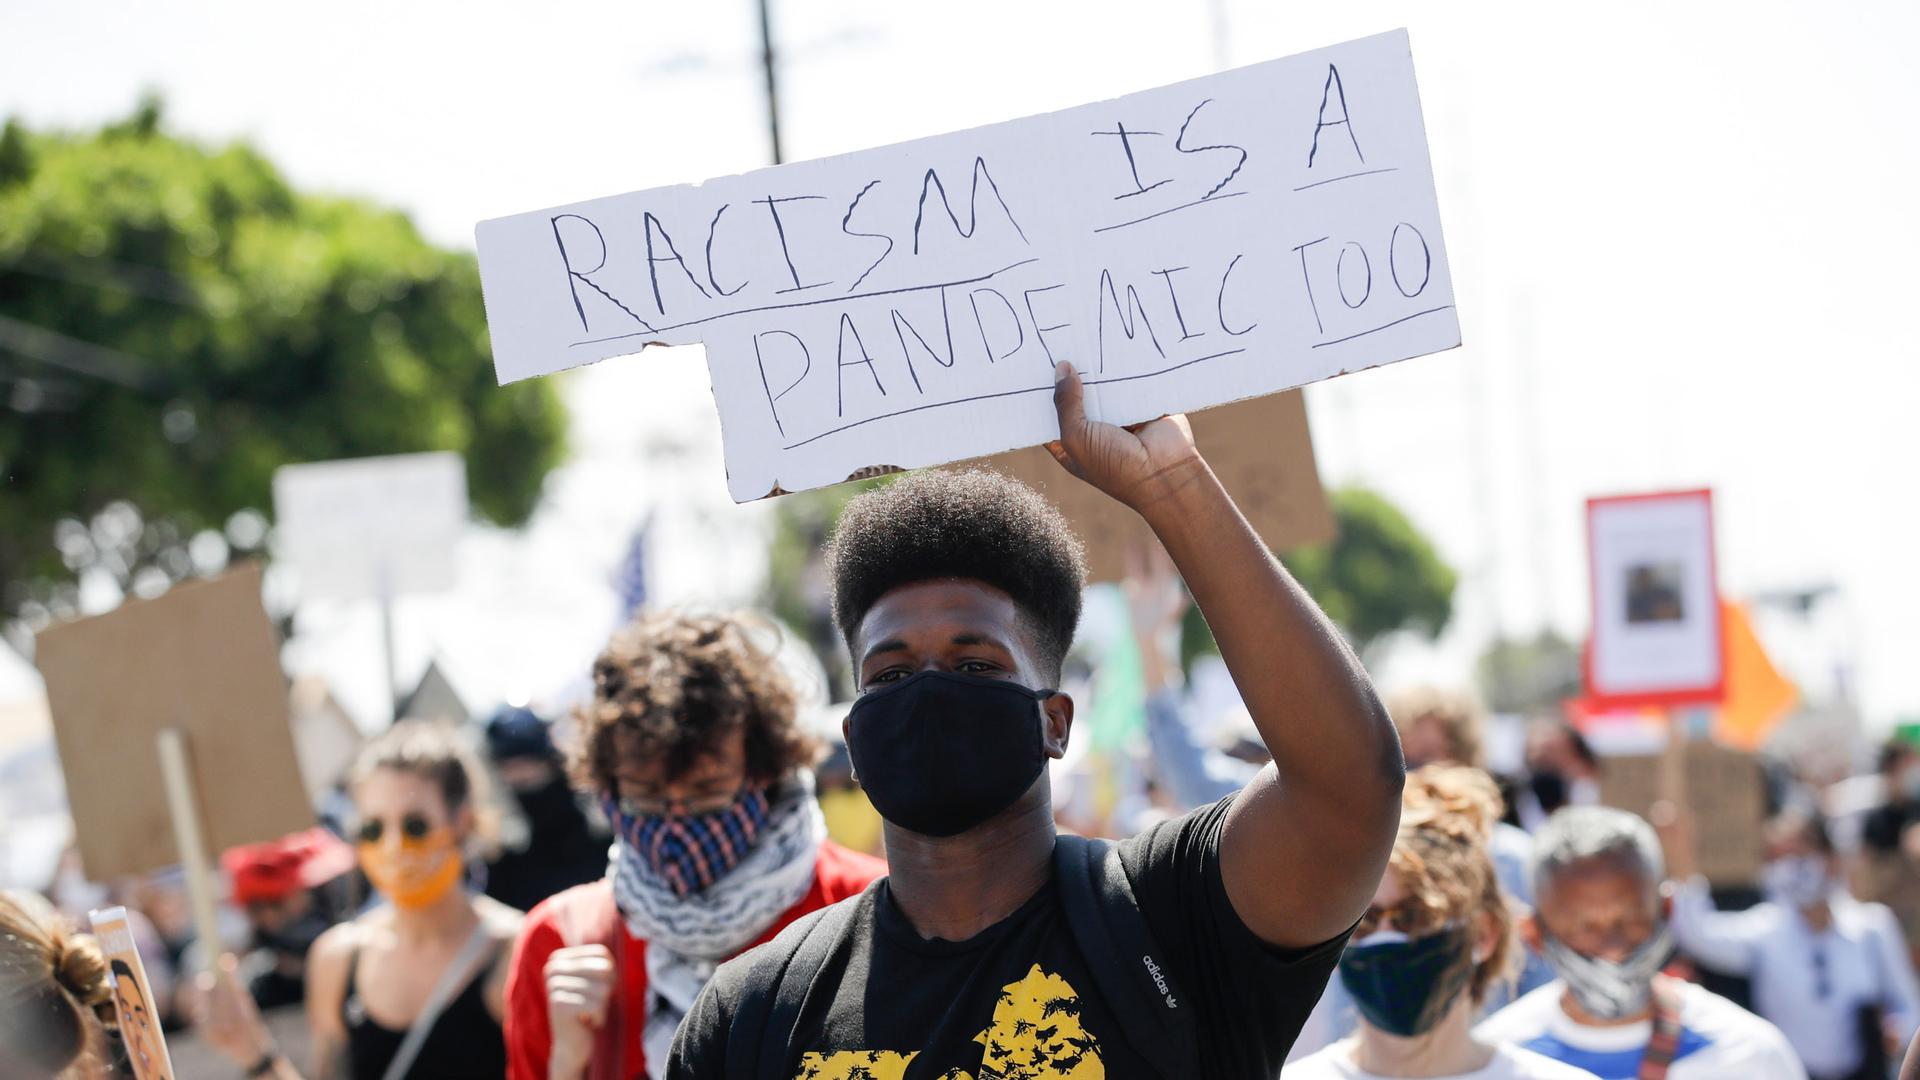 A crowd of protesters are shown with a man in the center holding a sign that reads, "Racism is a pandemic too."